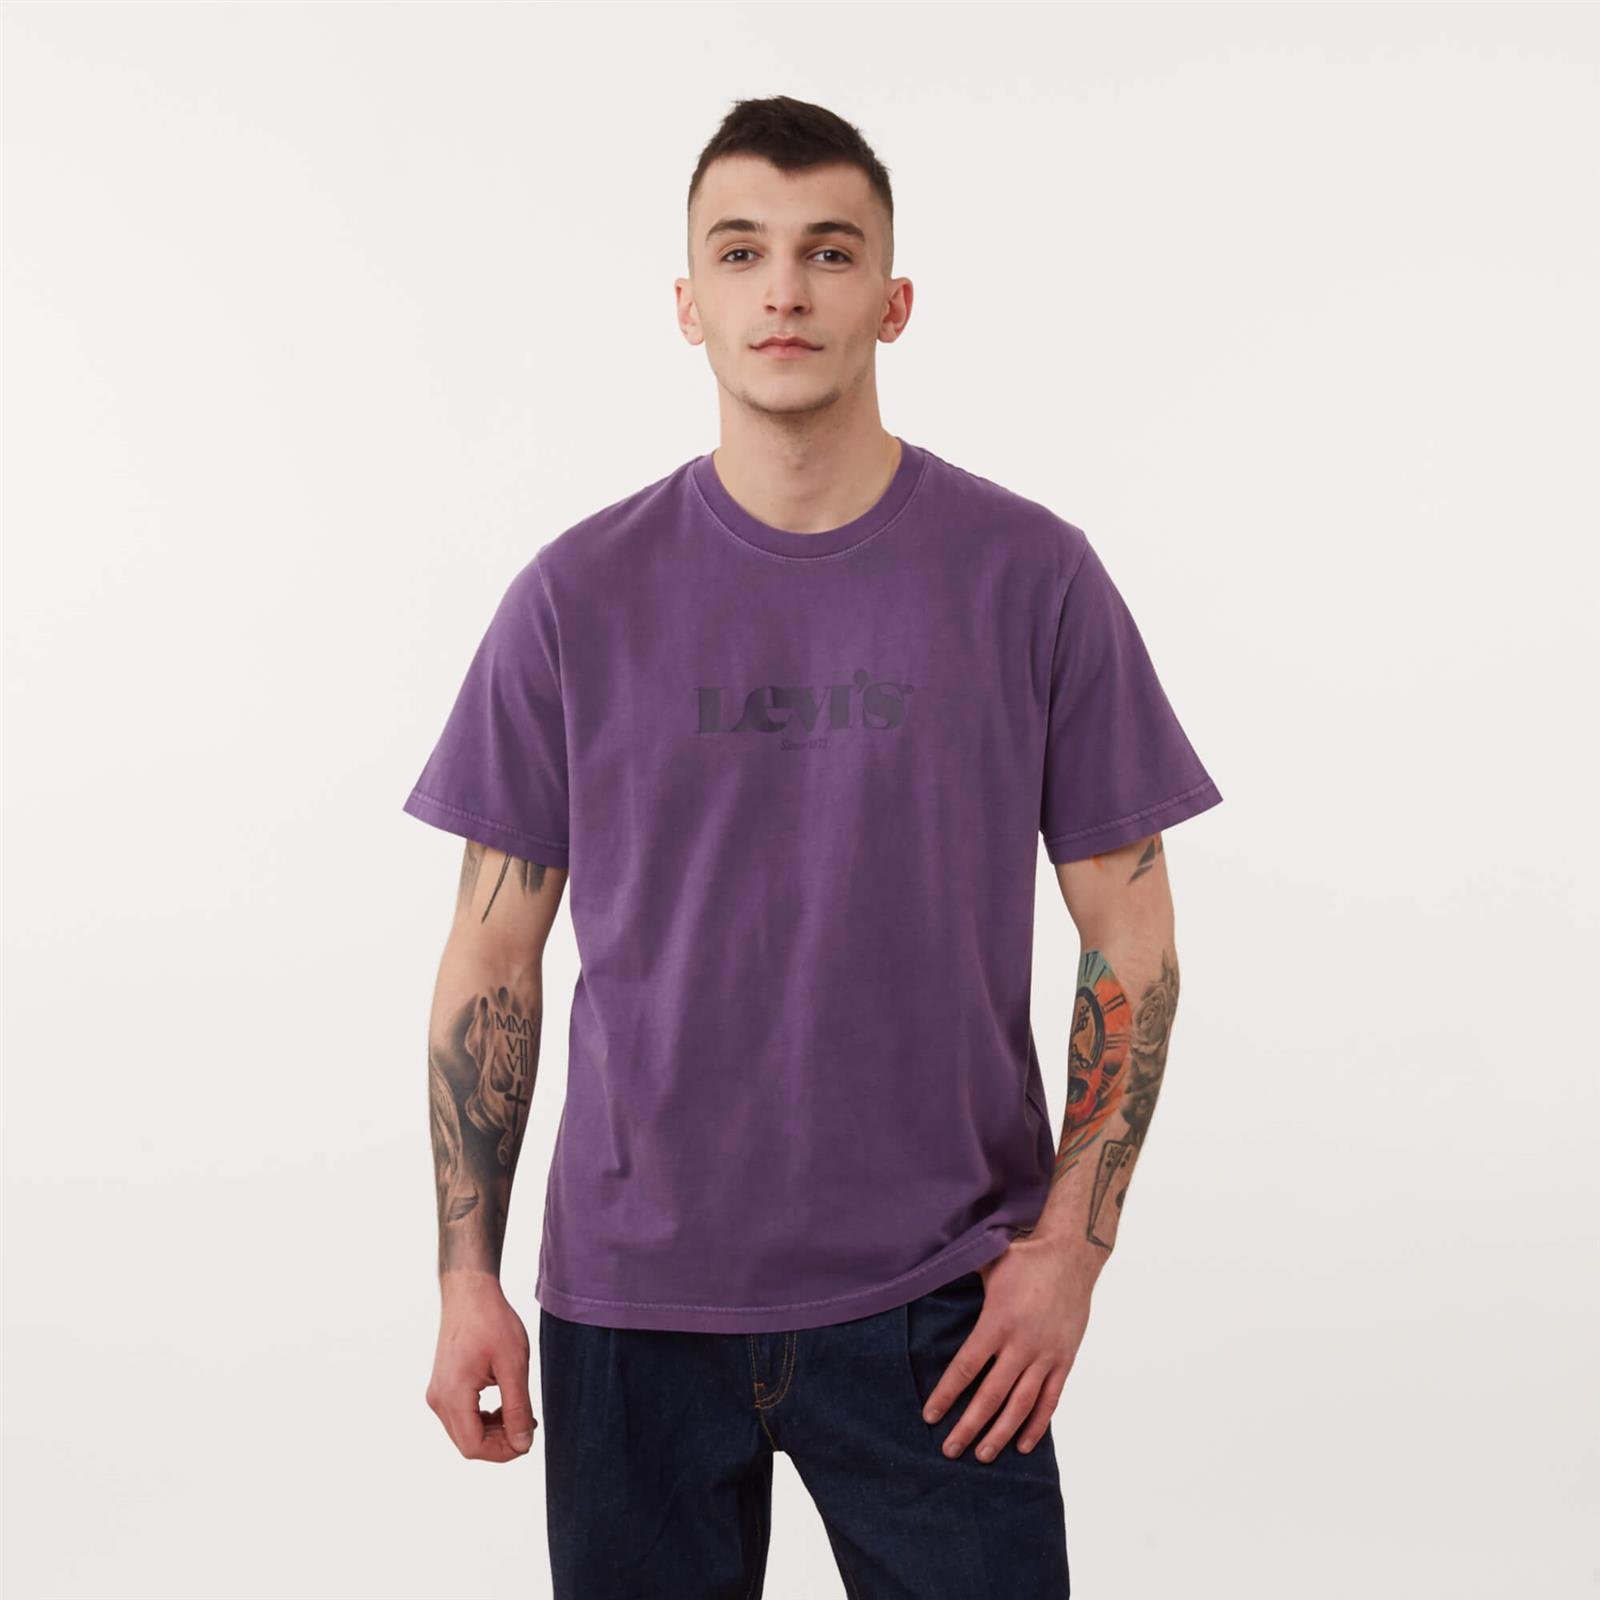 Levi's RELAXED FIT TEE Logan Berry | Men's \ Men's clothing \ T-shirts  Brands \ #Marki - 3 \ Levi's